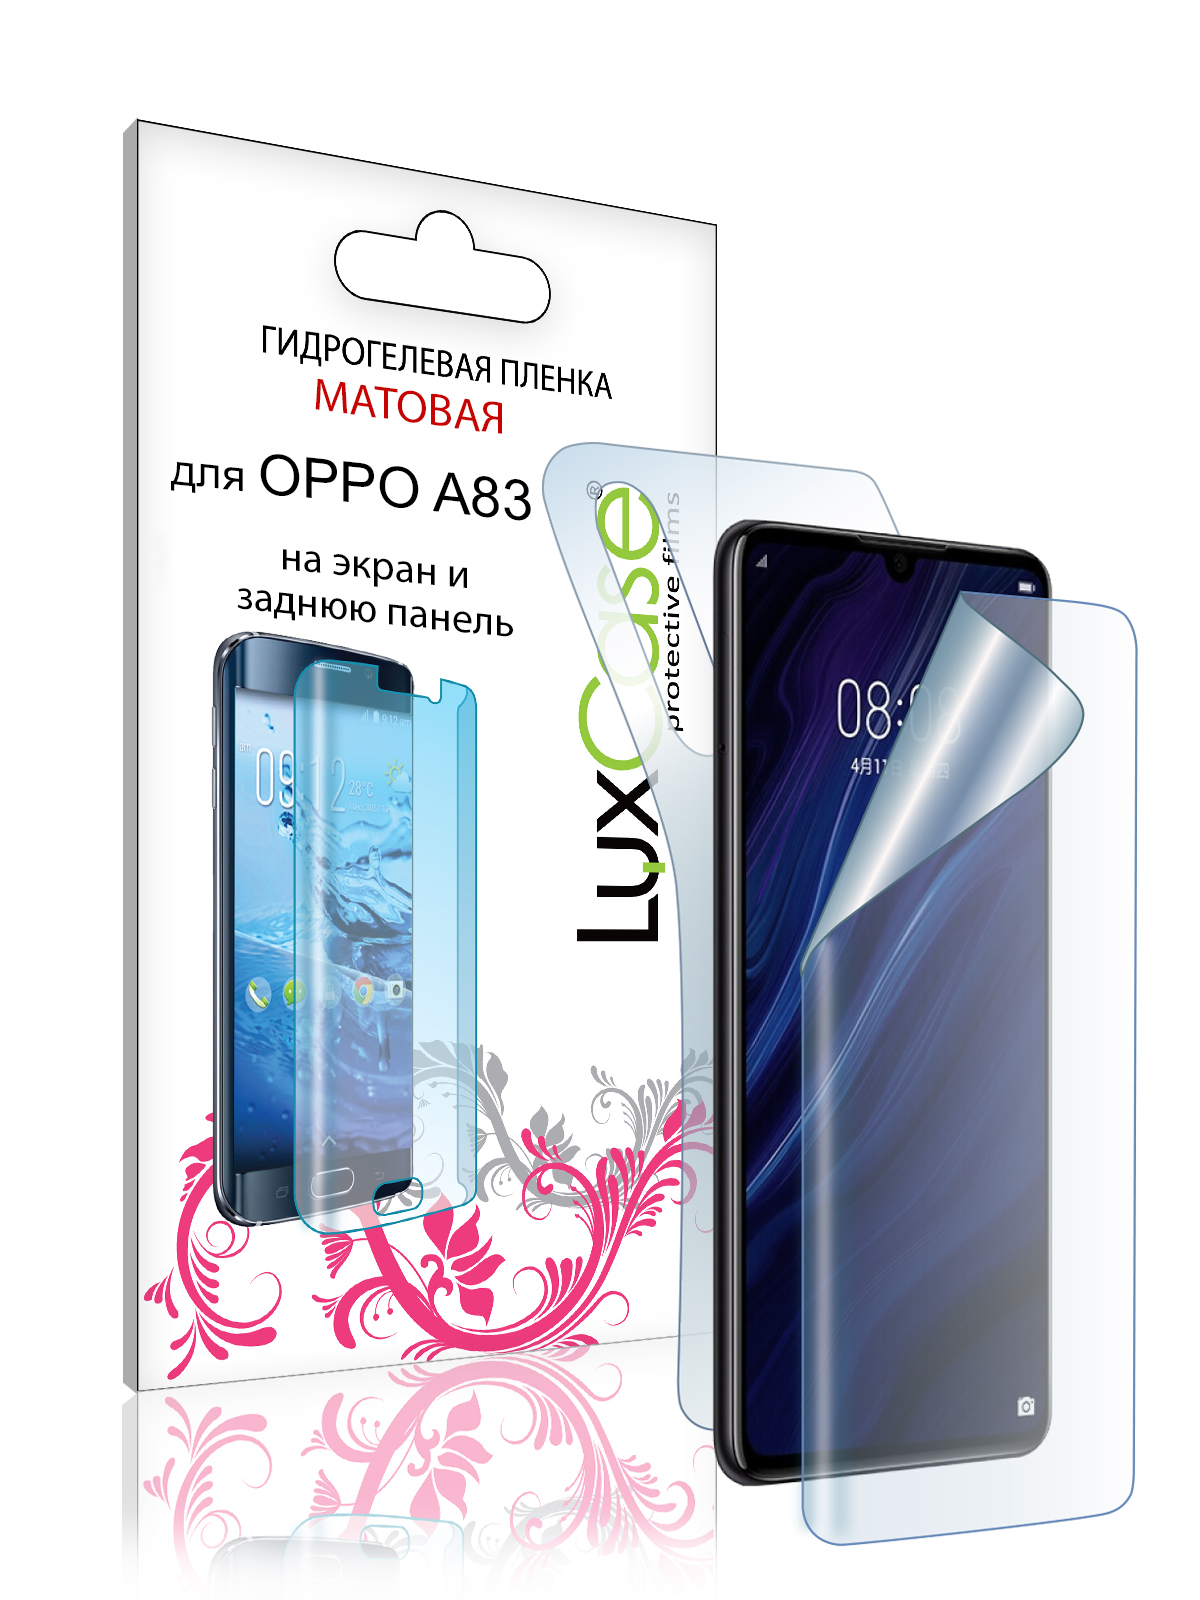 Гидрогелевая пленка LuxCase для Oppo A83 0.14mm Front and Back Transparent гидрогелевая пленка luxcase для oppo a3s 0 14mm front and back transparent 86976